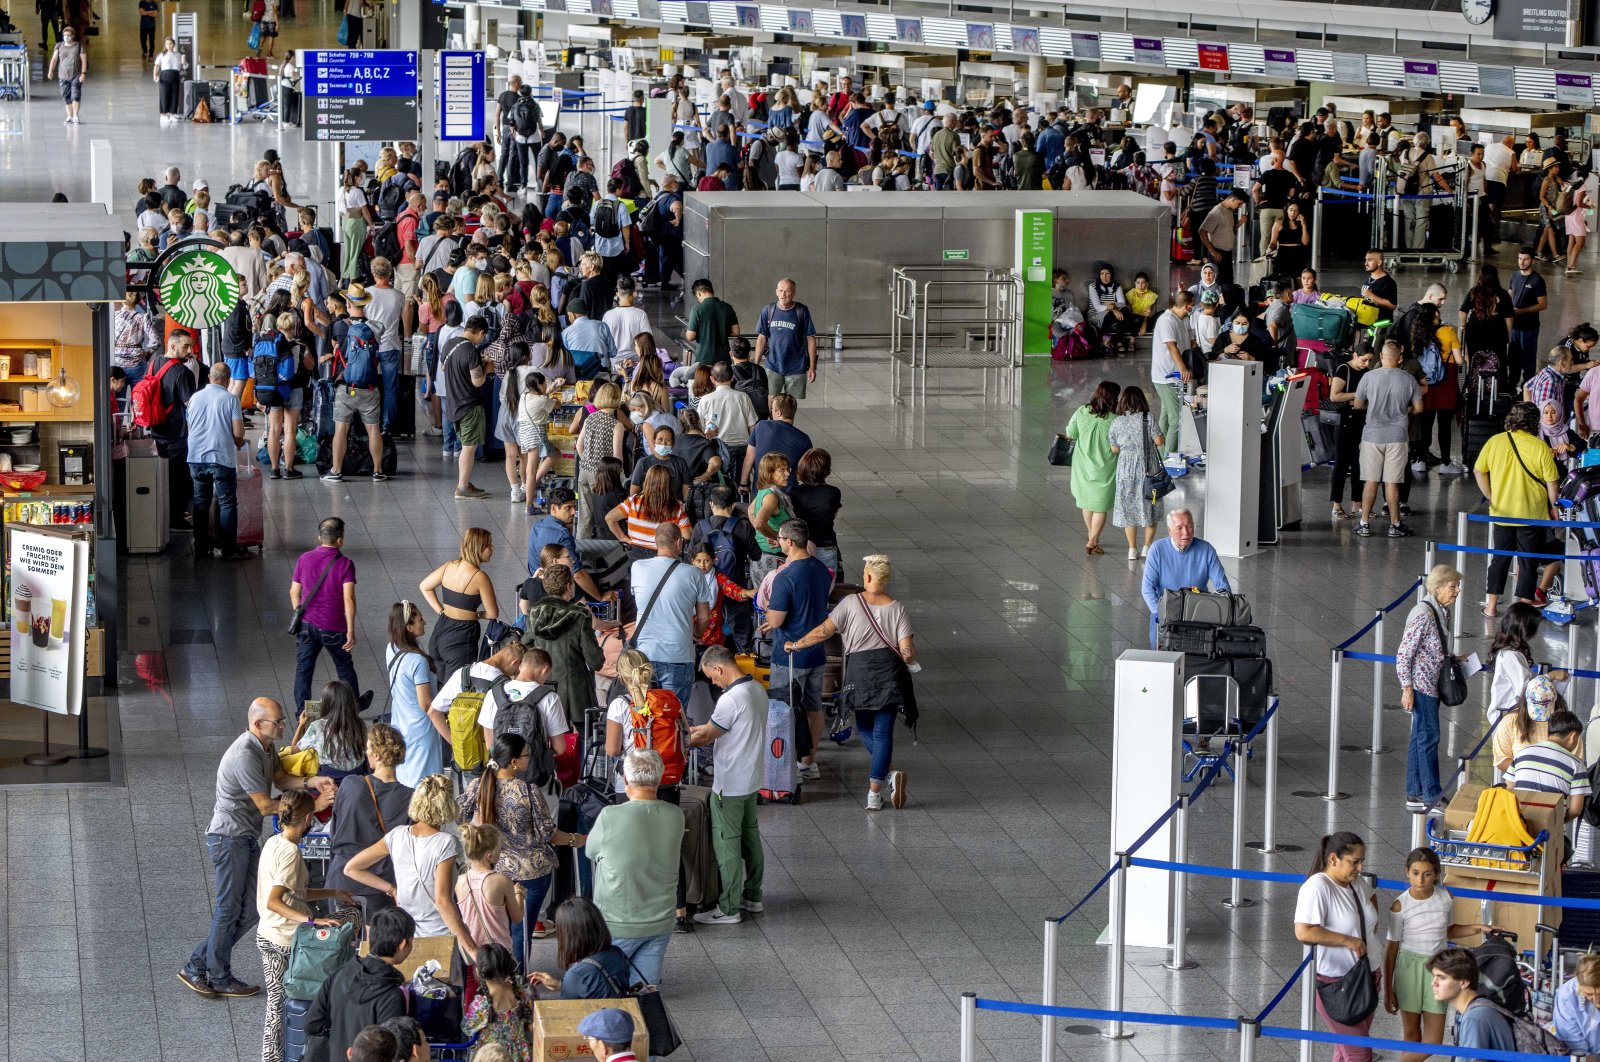 Passengers queue at the check in counters at the airport in Frankfurt, Germany, Monday, July 25, 2022. (AP Photo)